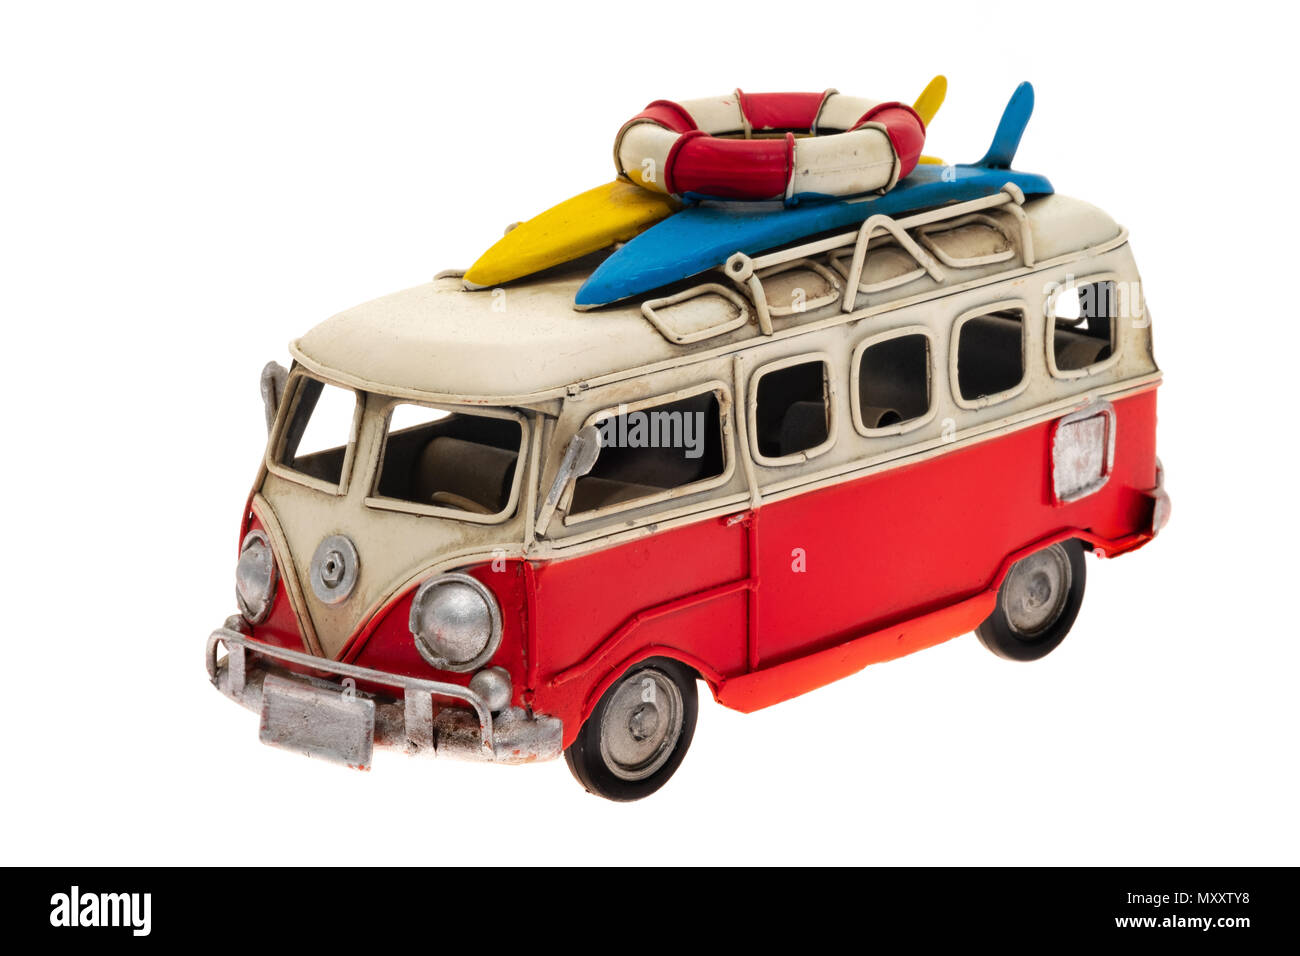 Volkswagen bus Cut Out Stock Images & Pictures - Alamy